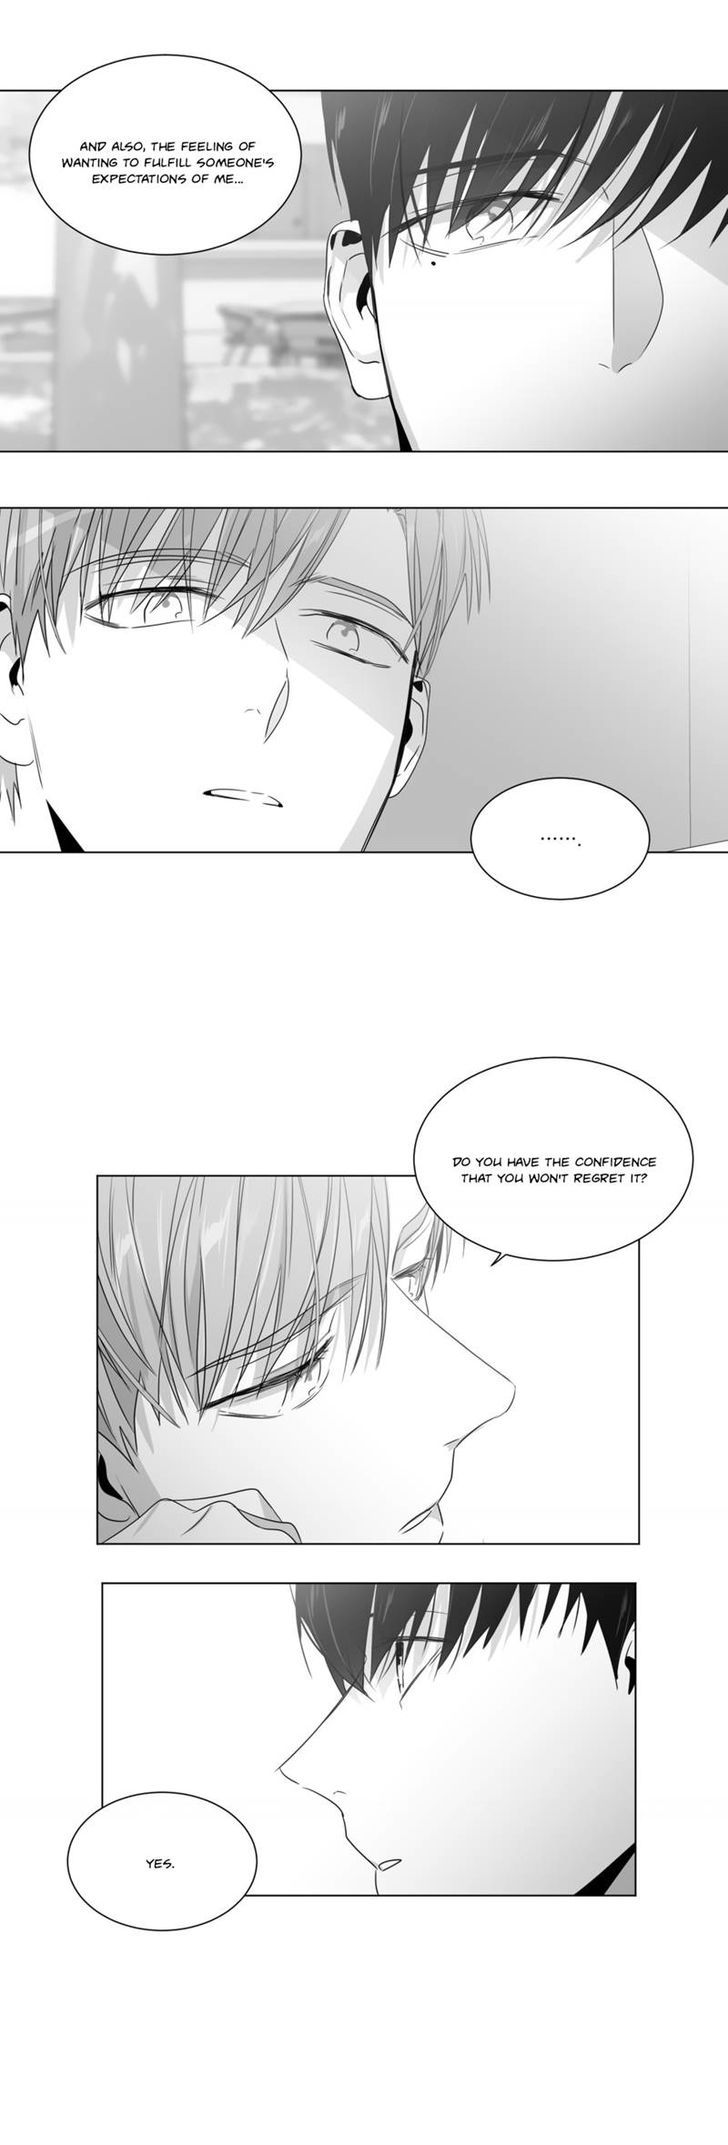 Lover Boy (Lezhin) Chapter 037 page 9